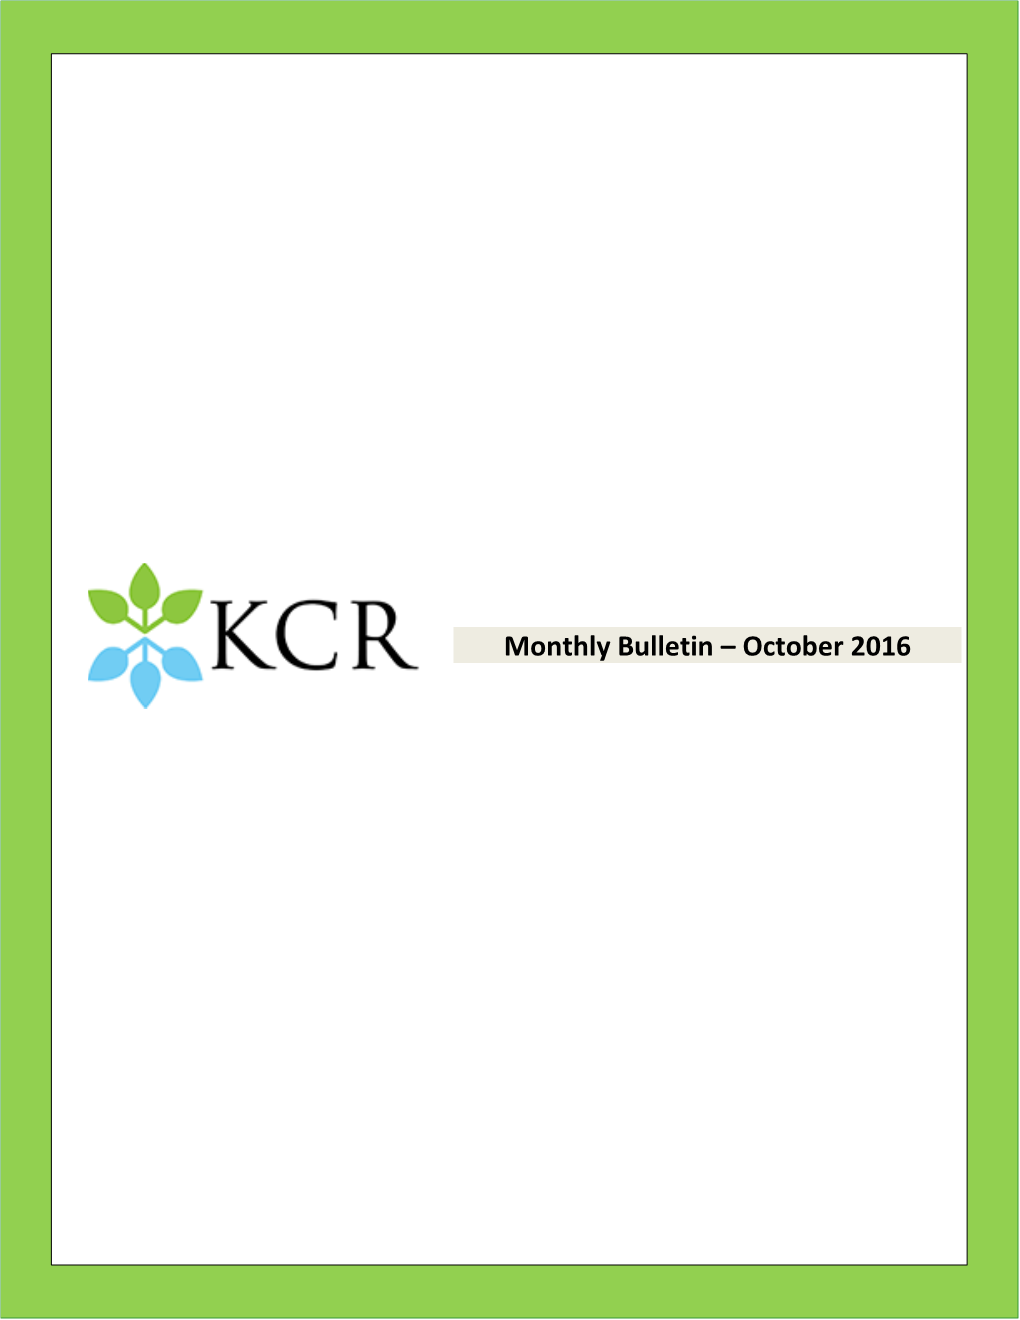 Monthly Bulletin – October 2016